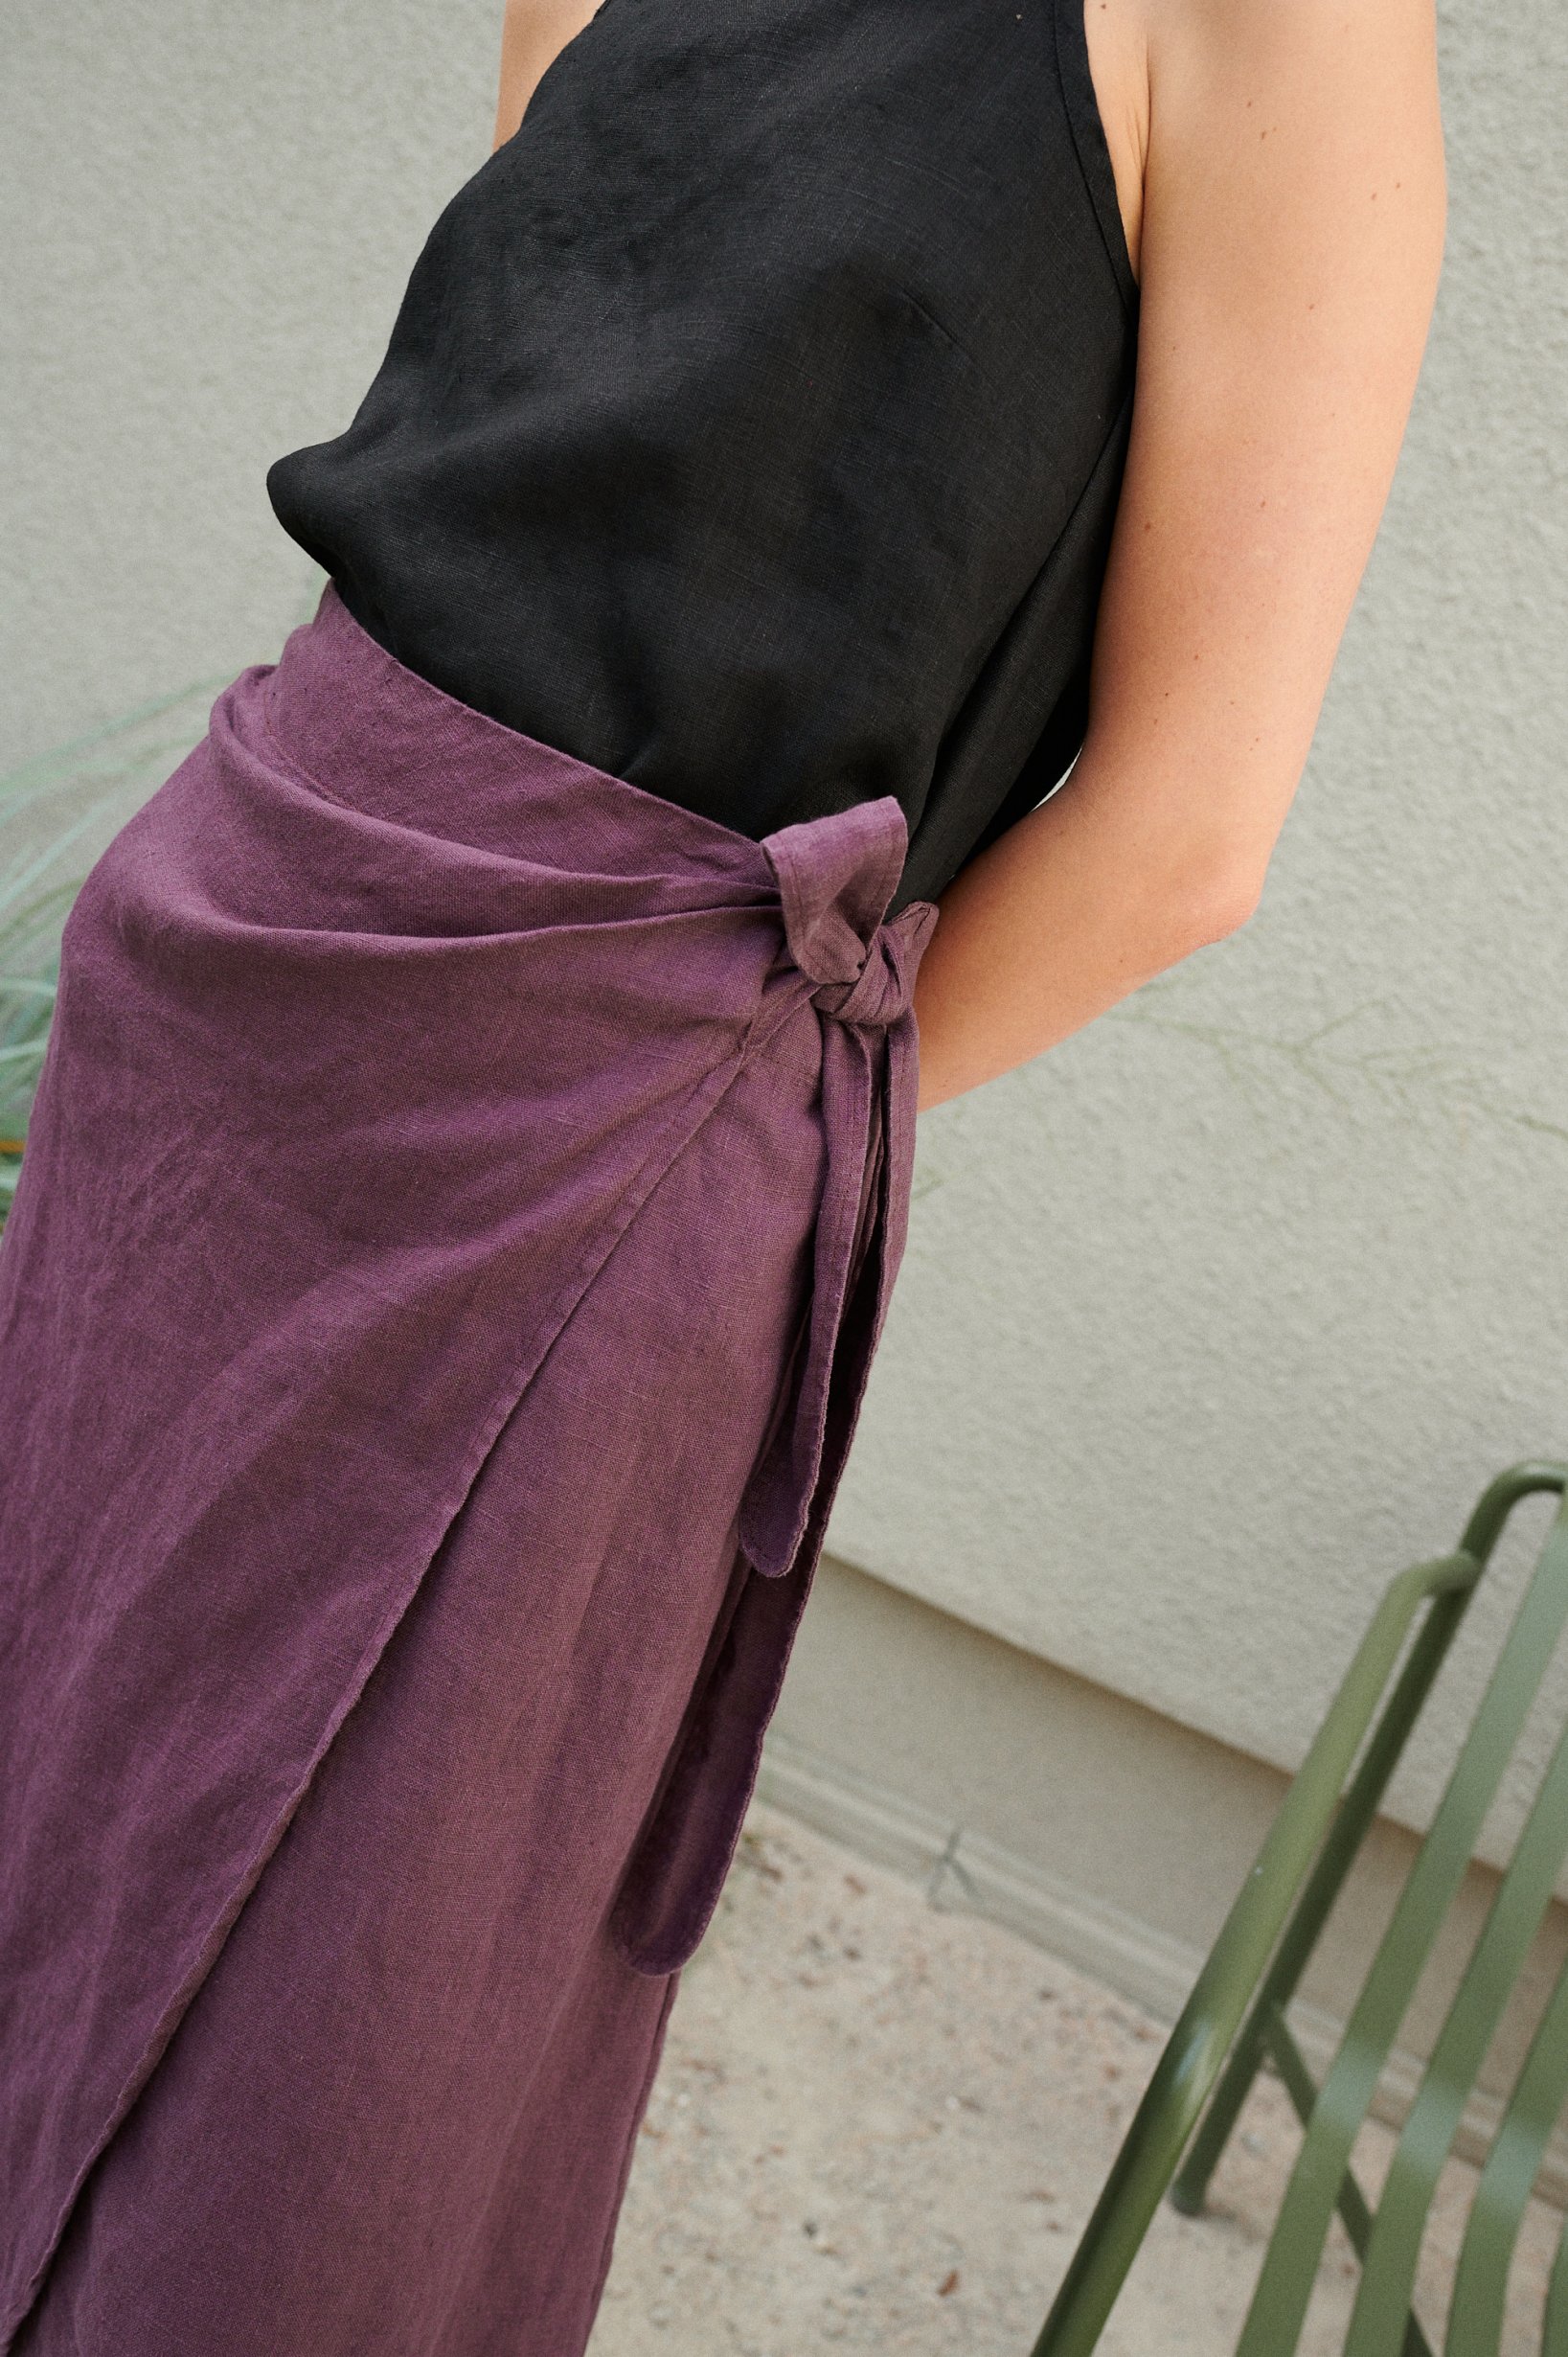 Details of an eggplant violet linen skirt with an elasticated waist and a tie